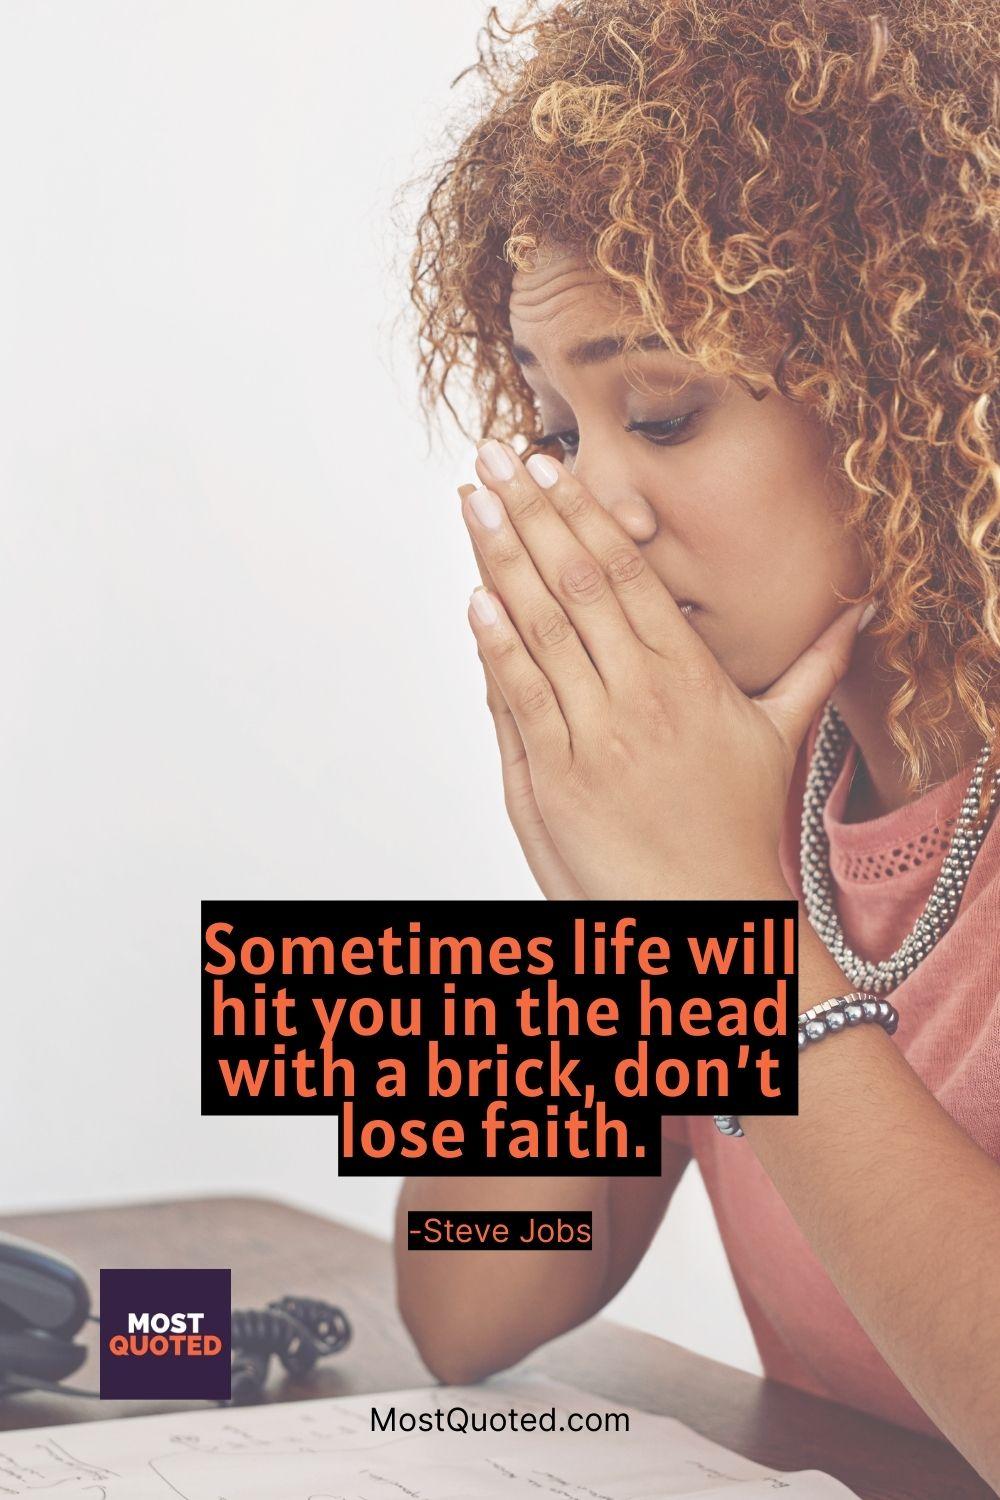 Sometimes life will hit you in the head with a brick, don’t lose faith. - Steve Jobs